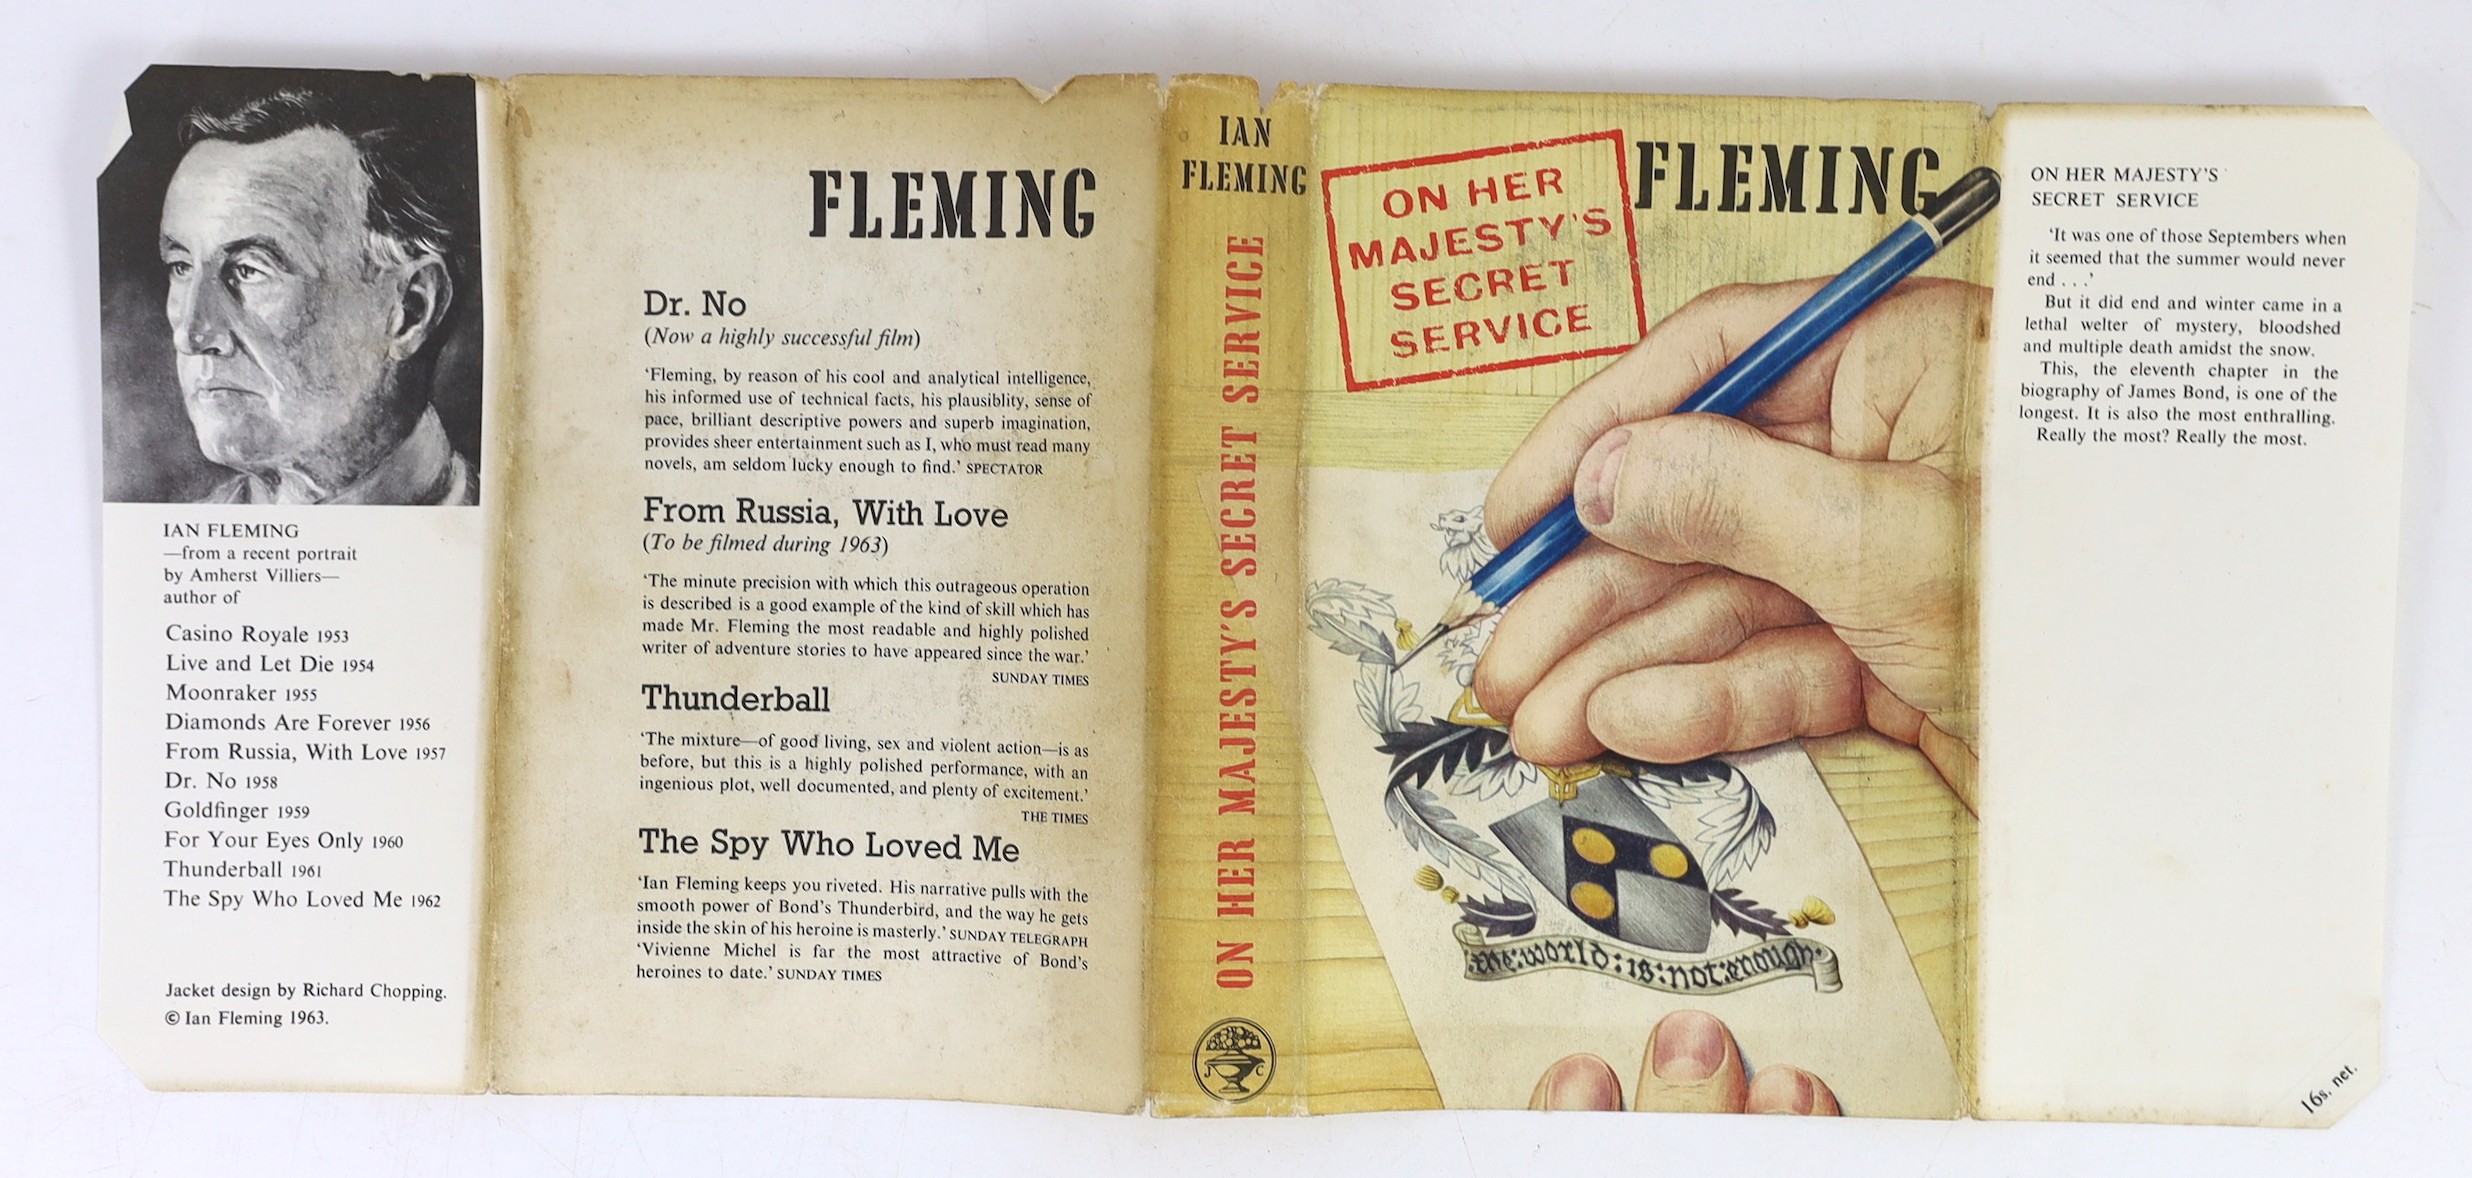 Fleming, Ian - On Her Majesty’s Secret Service, 1st edition, 8vo, cloth in unclipped d/j, Jonathan Cape, London, 1963